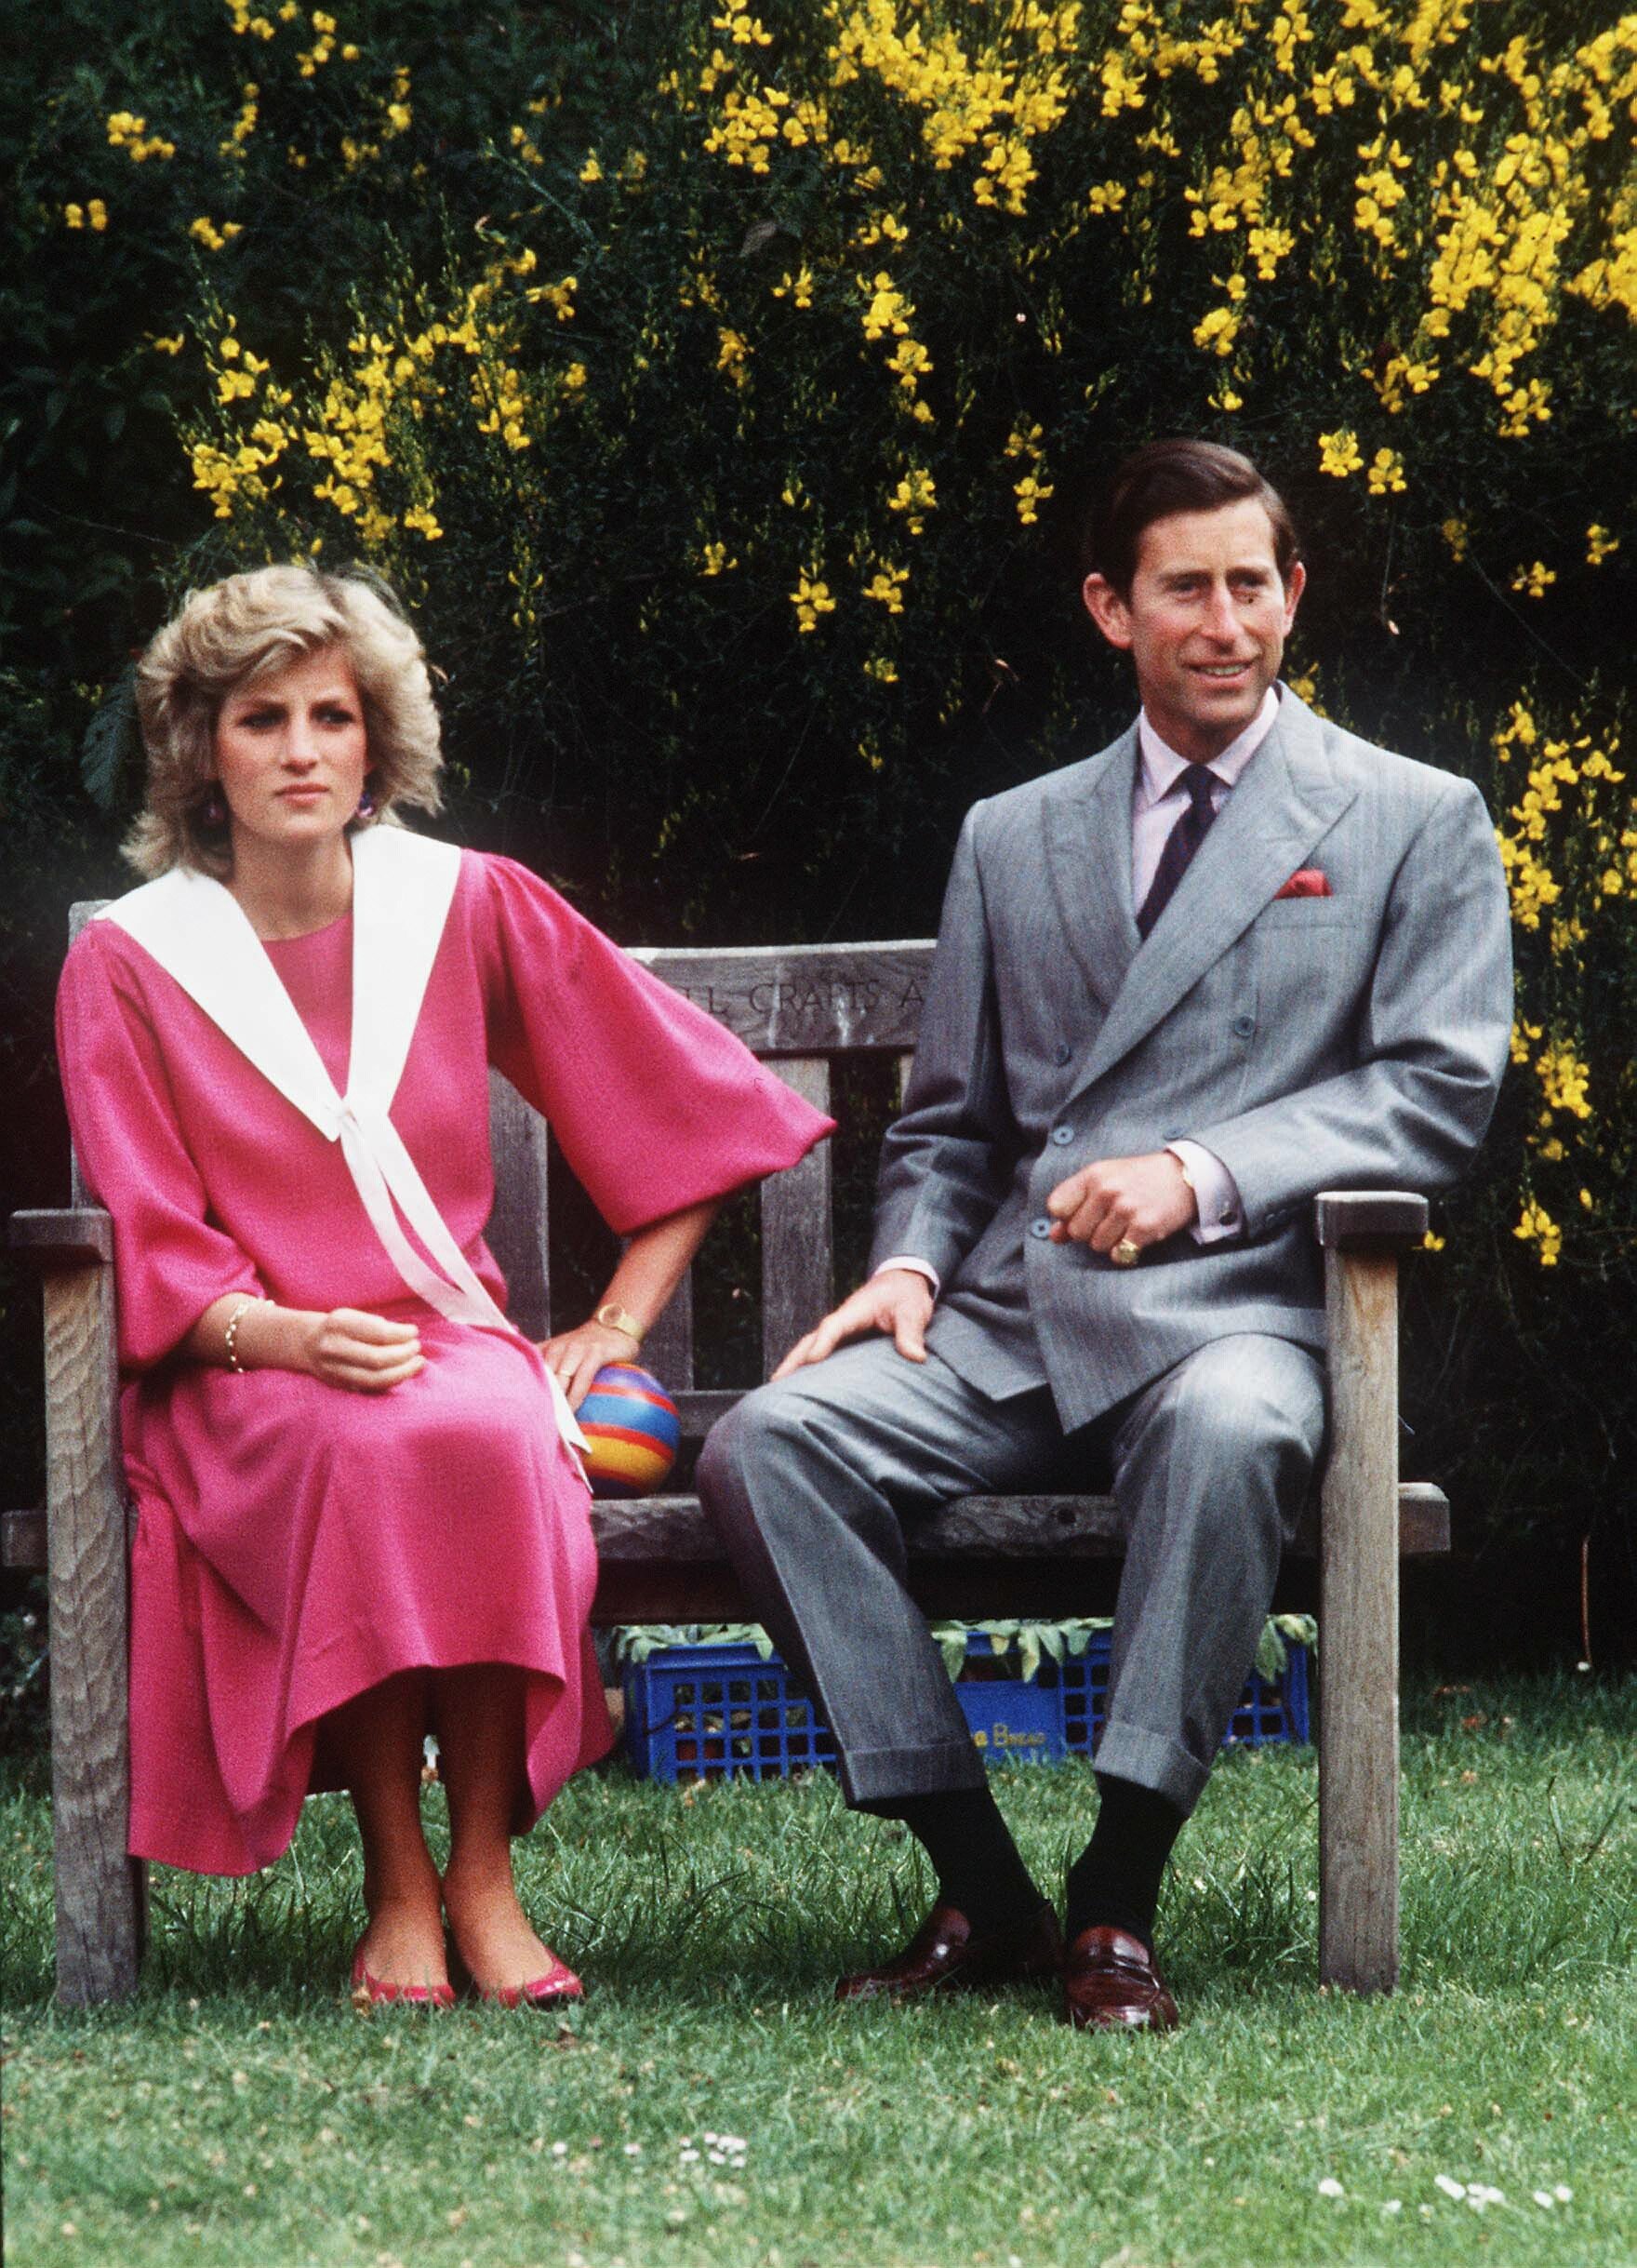 Prince Charles and Princess Diana while 6 months pregnant with Prince Harry sitting on a wooden bench during a photocall in the garden of their home at Kensington Palace on June 12, 1984 in London, United Kingdom. / Source: Getty Images